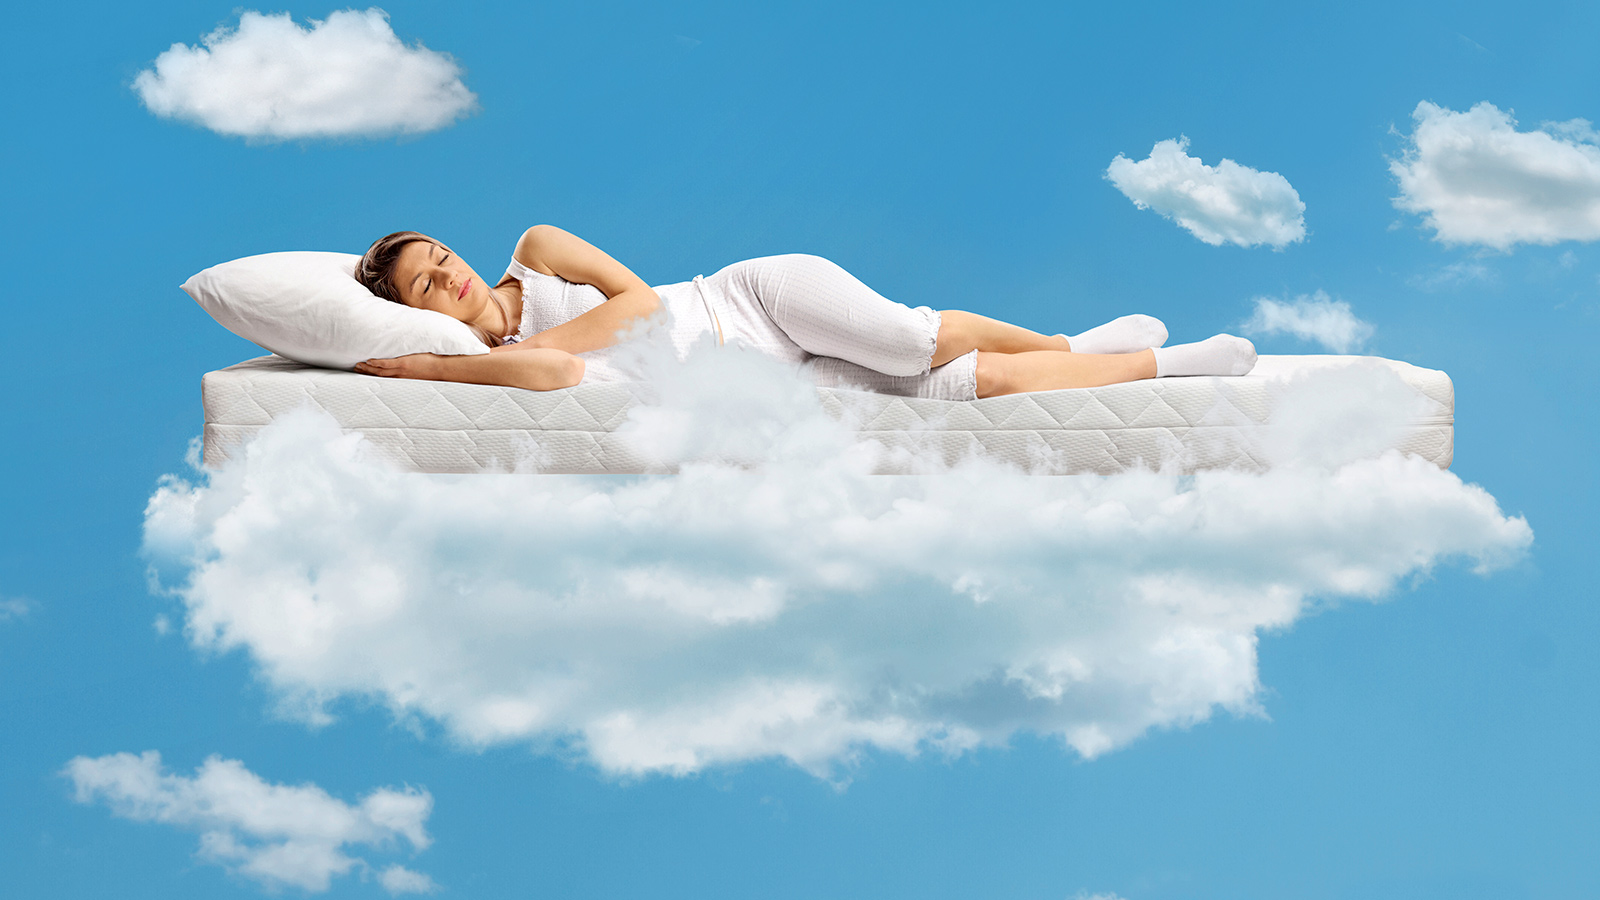 Woman sleeping on mattress in the clouds